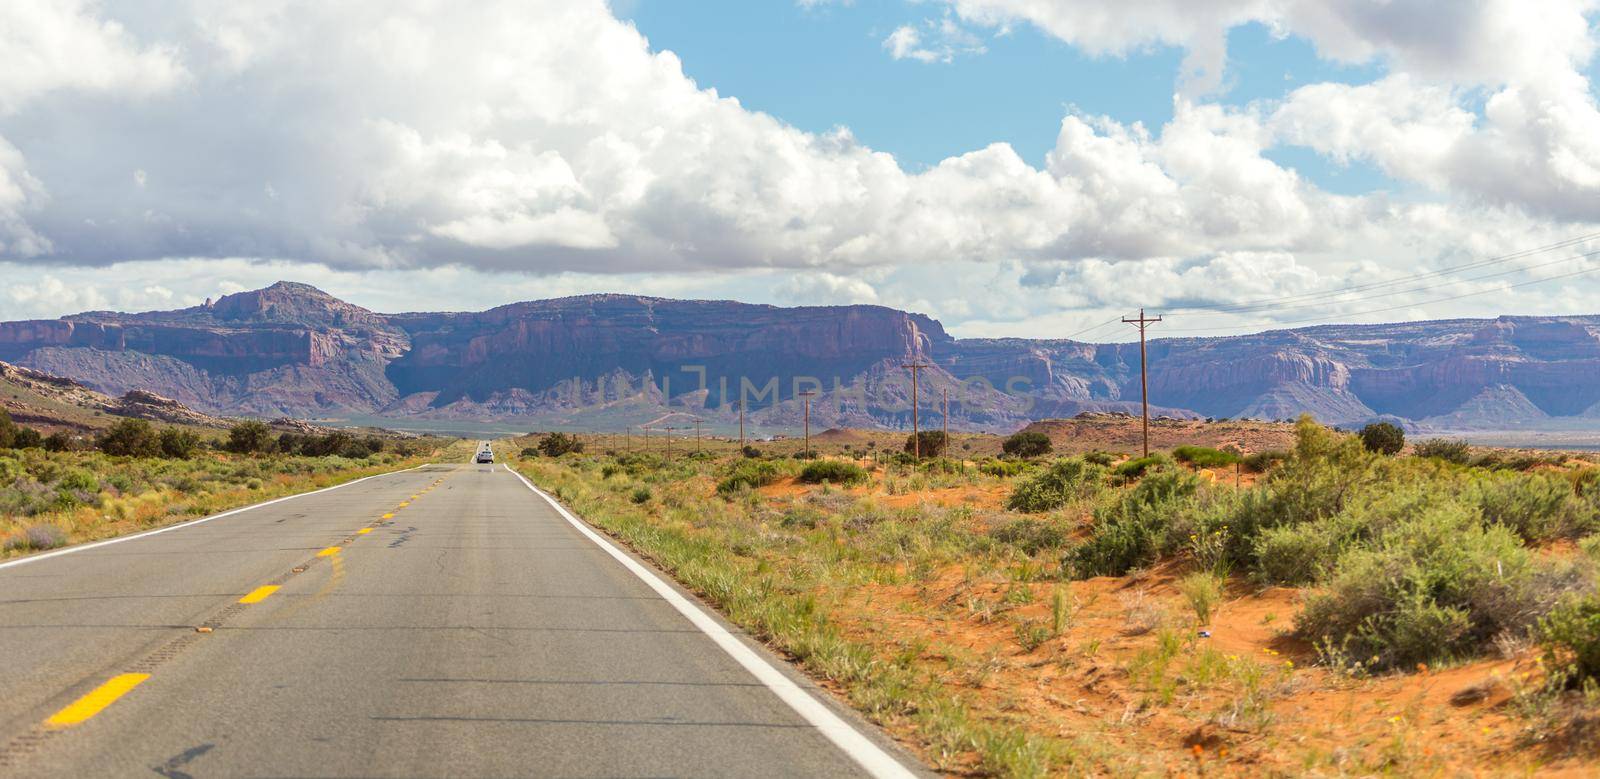 Highway leading into Monument Valley, Utah, USA